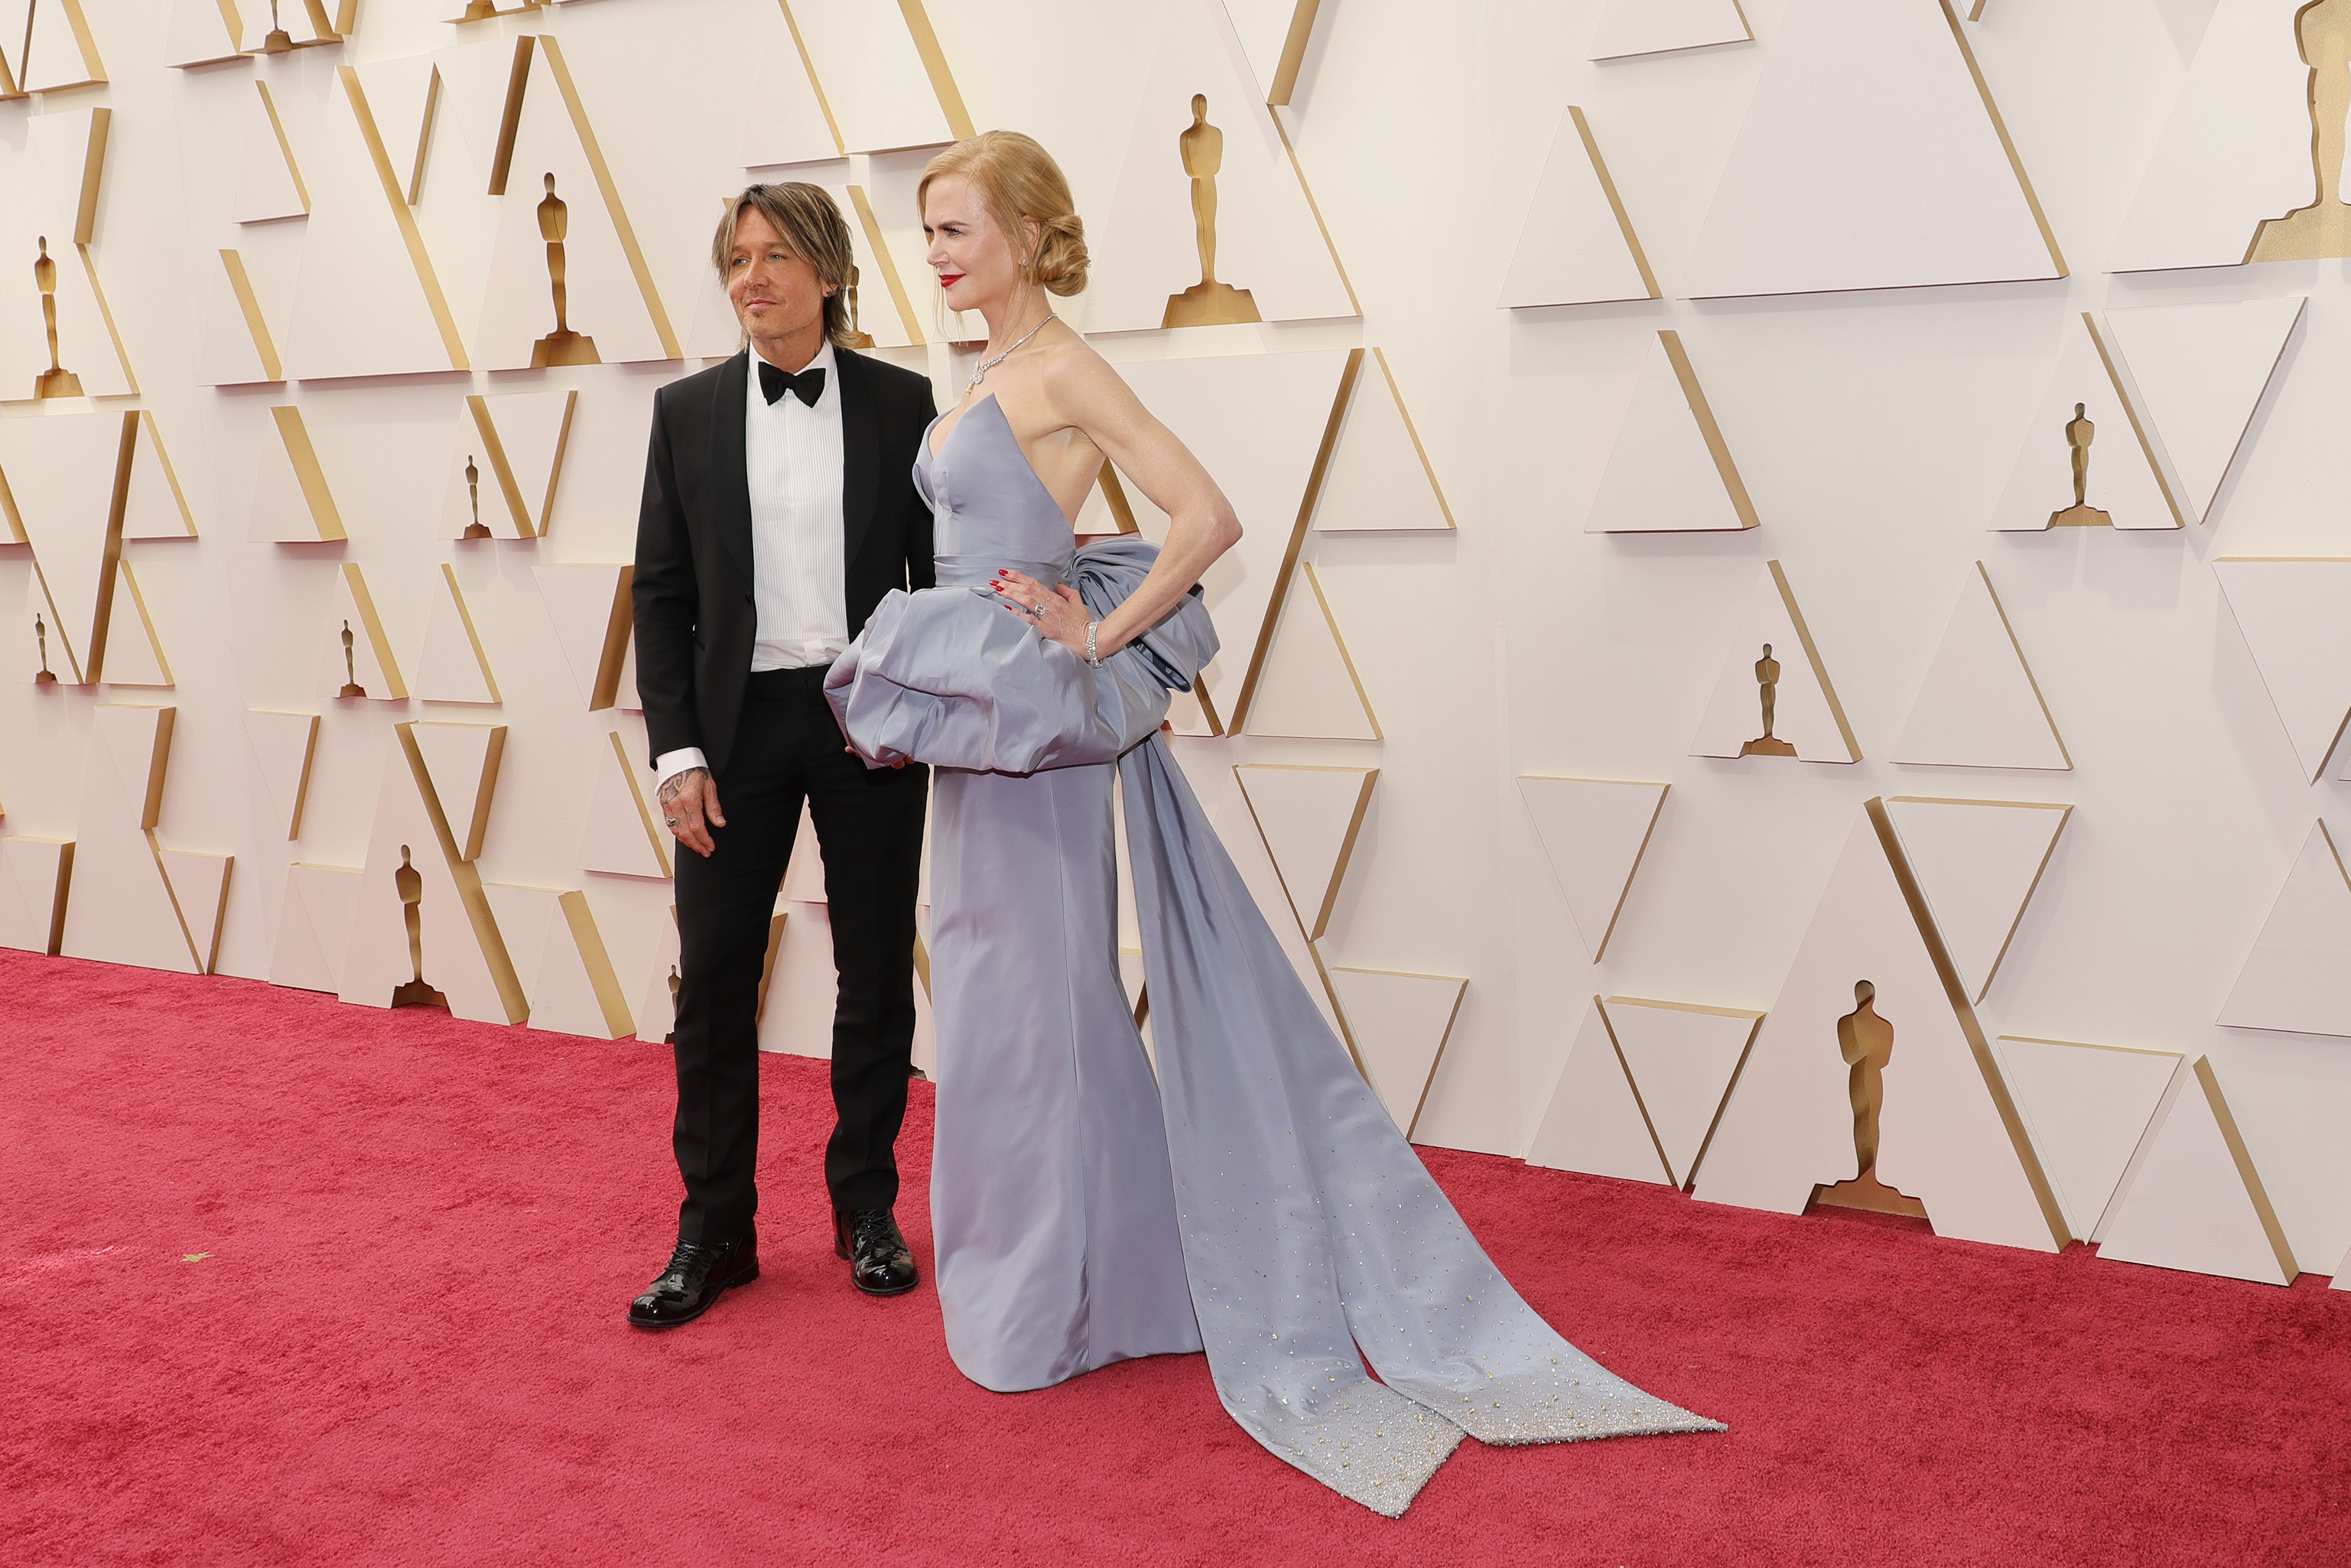 HOLLYWOOD, CALIFORNIA - MARCH 27: (L-R) Keith Urban and Nicole Kidman attend the 94th Annual Academy Awards at Hollywood and Highland on March 27, 2022 in Hollywood, California. (Photo by Mike Coppola/Getty Images) (Foto: Getty Images)